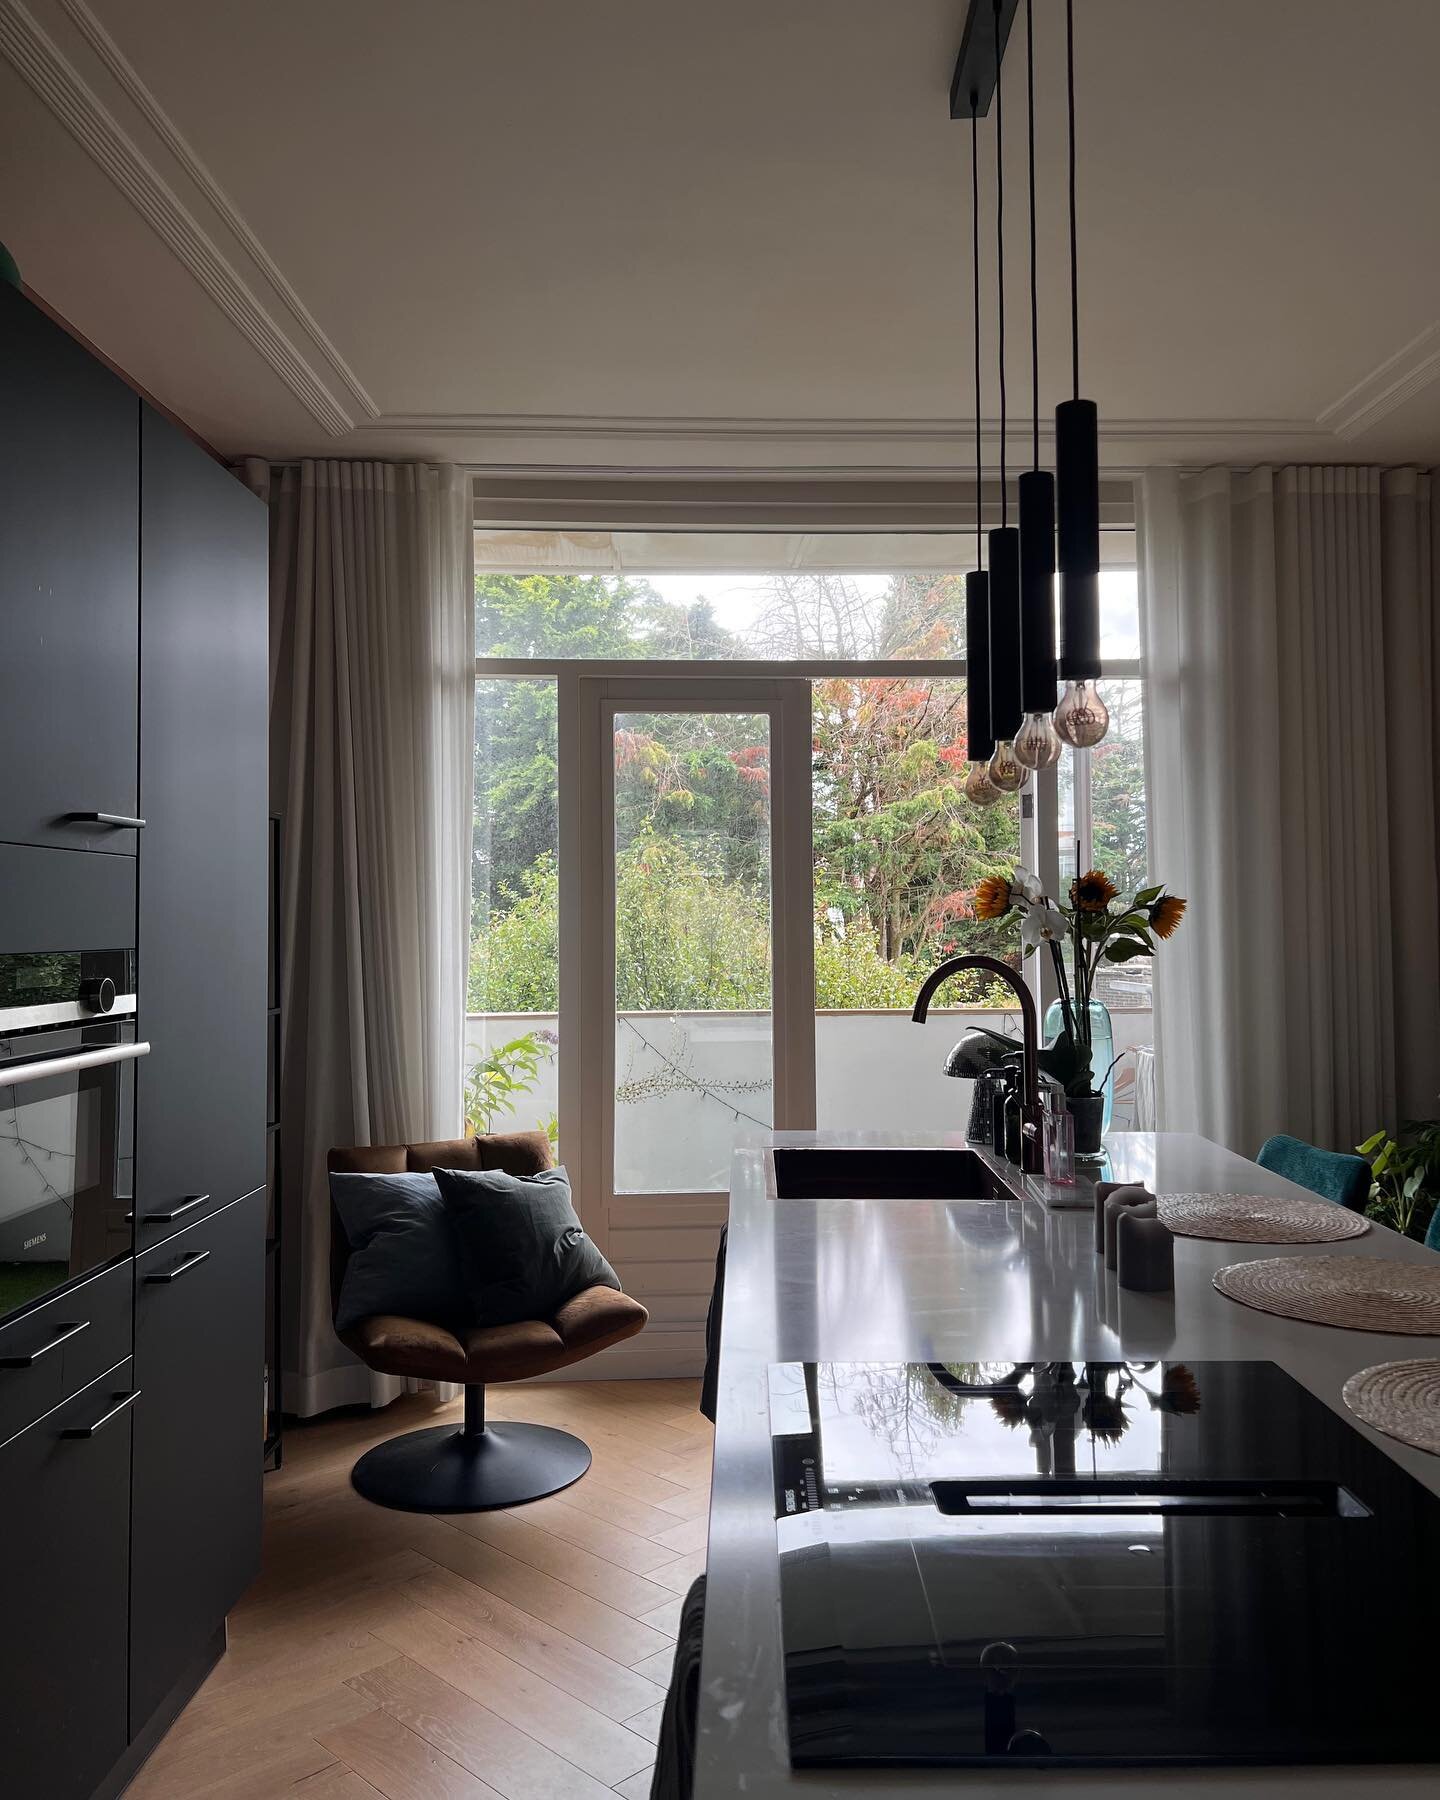 A great apartment with a modern kitchen in the Hague 🧦💌 the review from may 2023

Location: The Hague 
Price: 2250 &euro; 
Type: furnished apartment for a couple